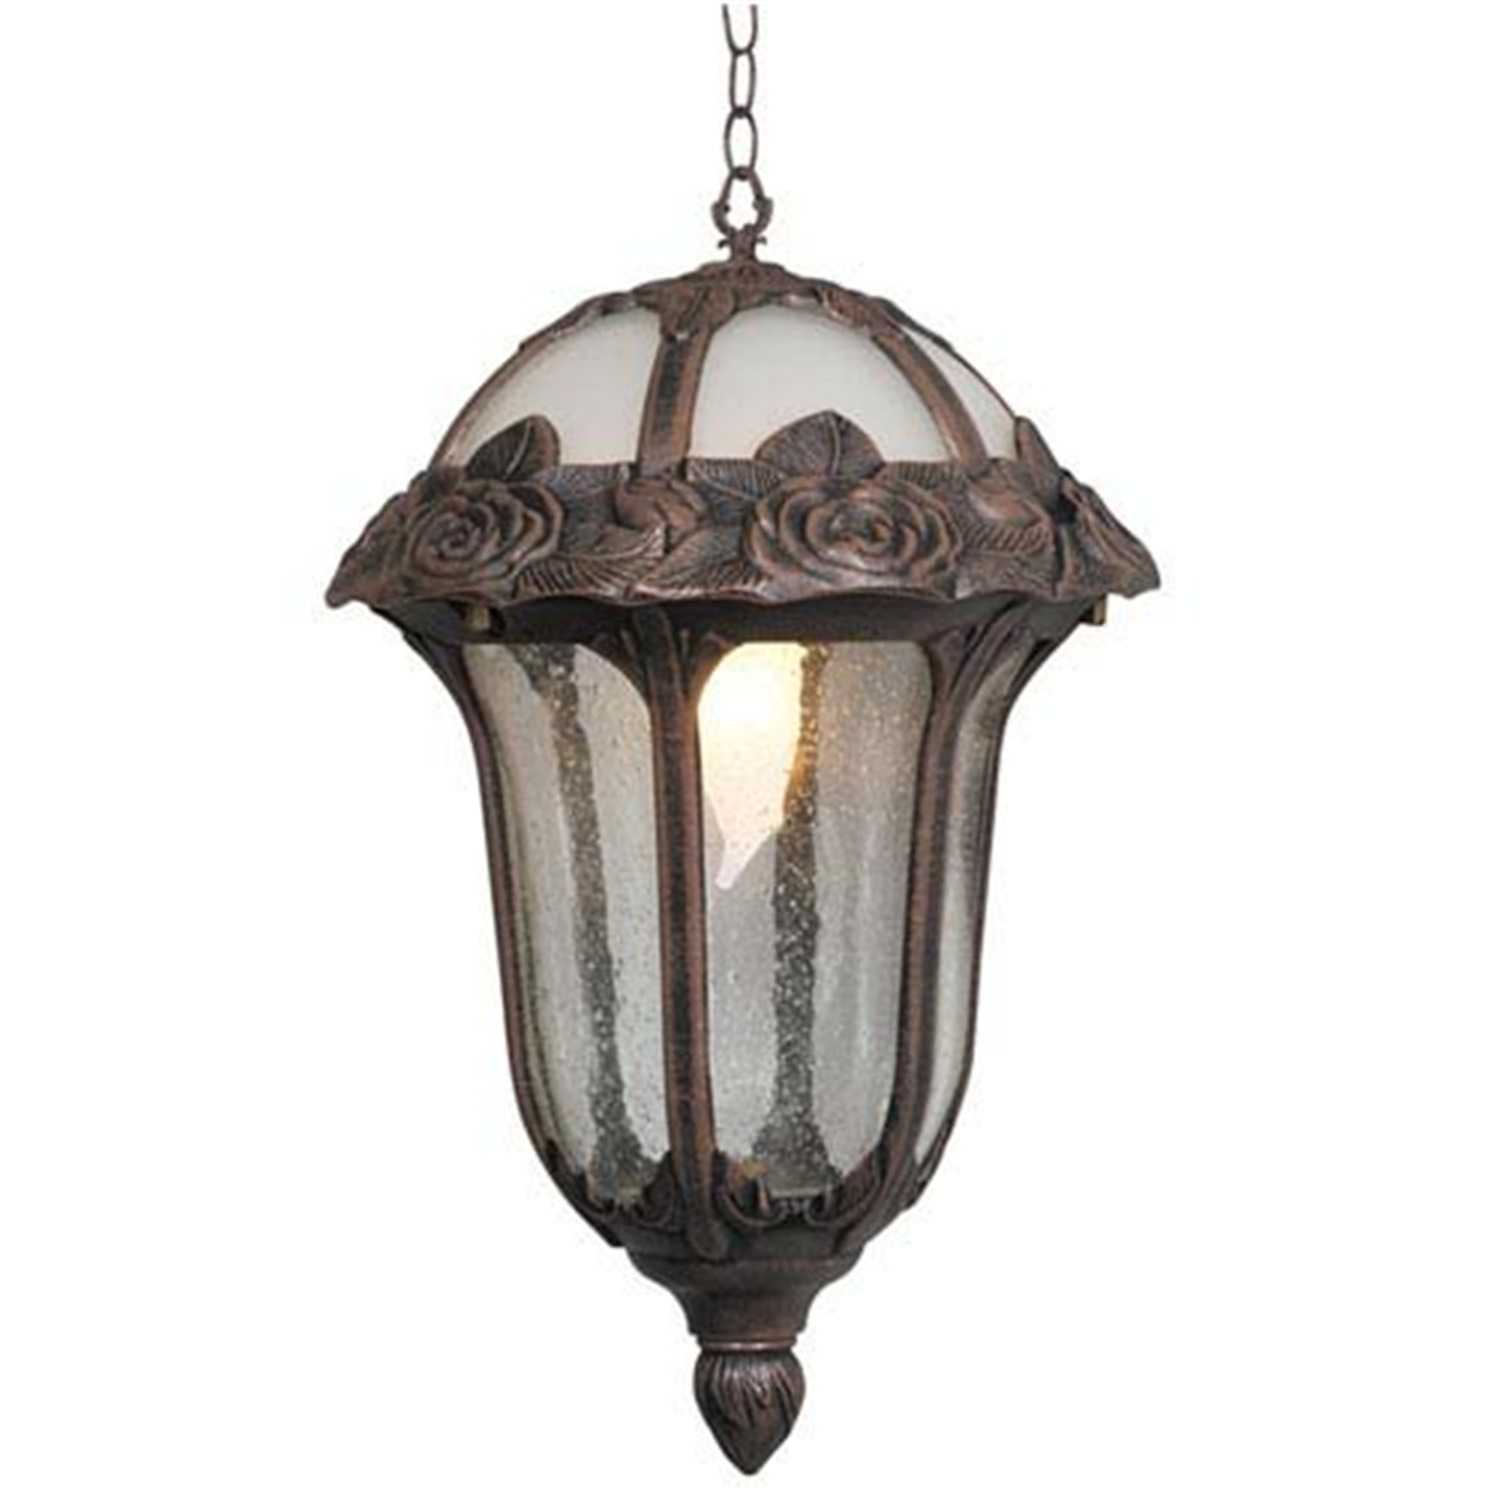 Special Lite Products Rose Garden F-1714 Small Chain Outdoor Pendant Light - image 1 of 2